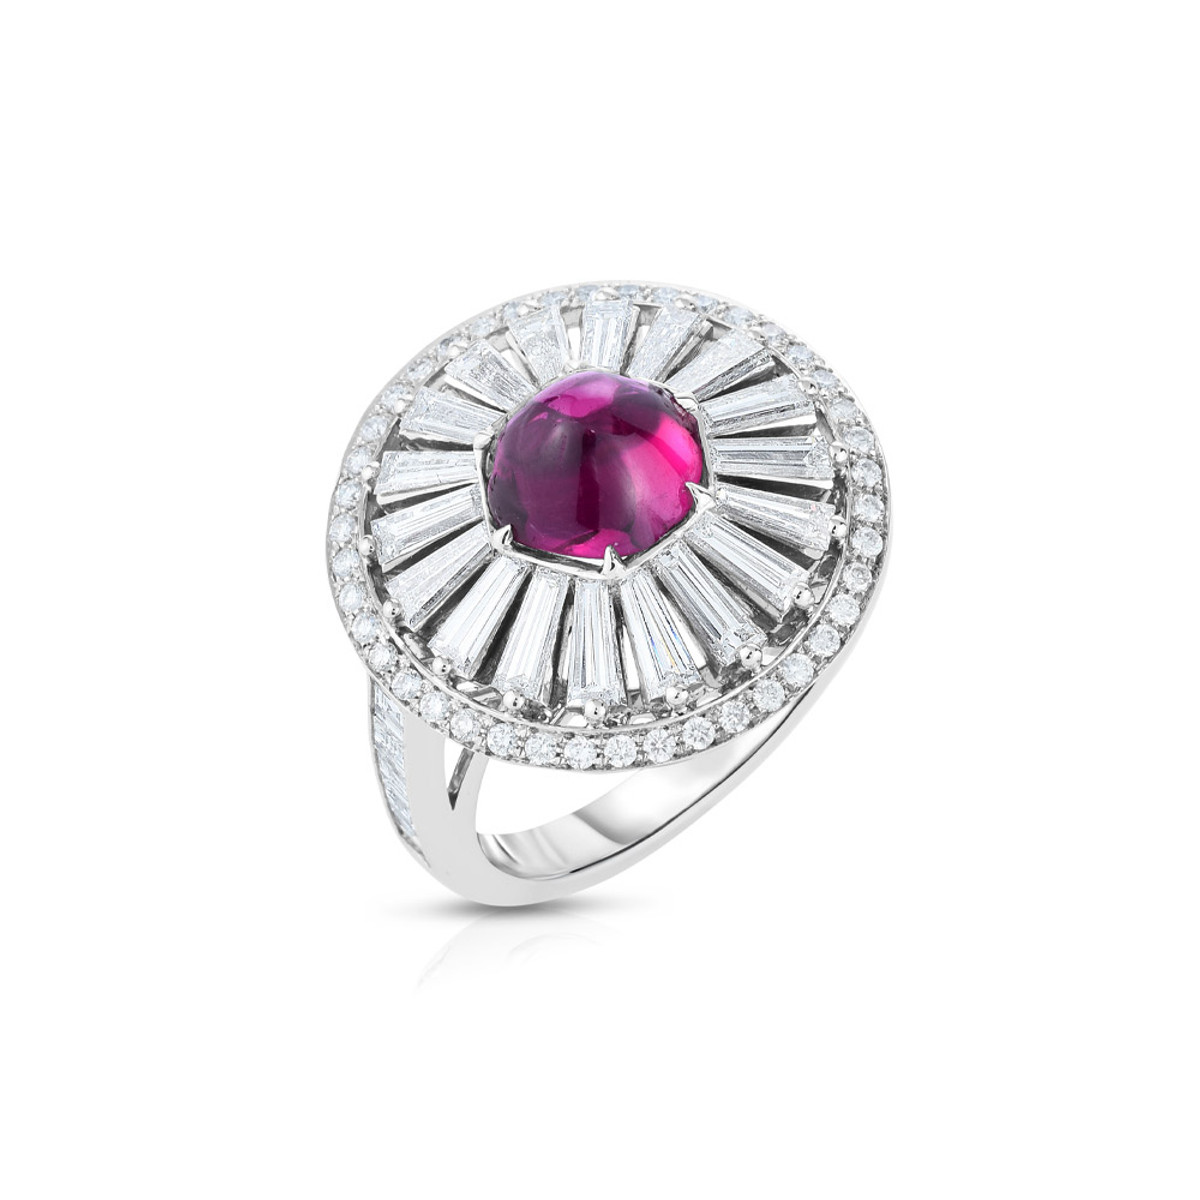 Hyde Park Collection Platinum Ruby and Diamond Ring-46977 Product Image